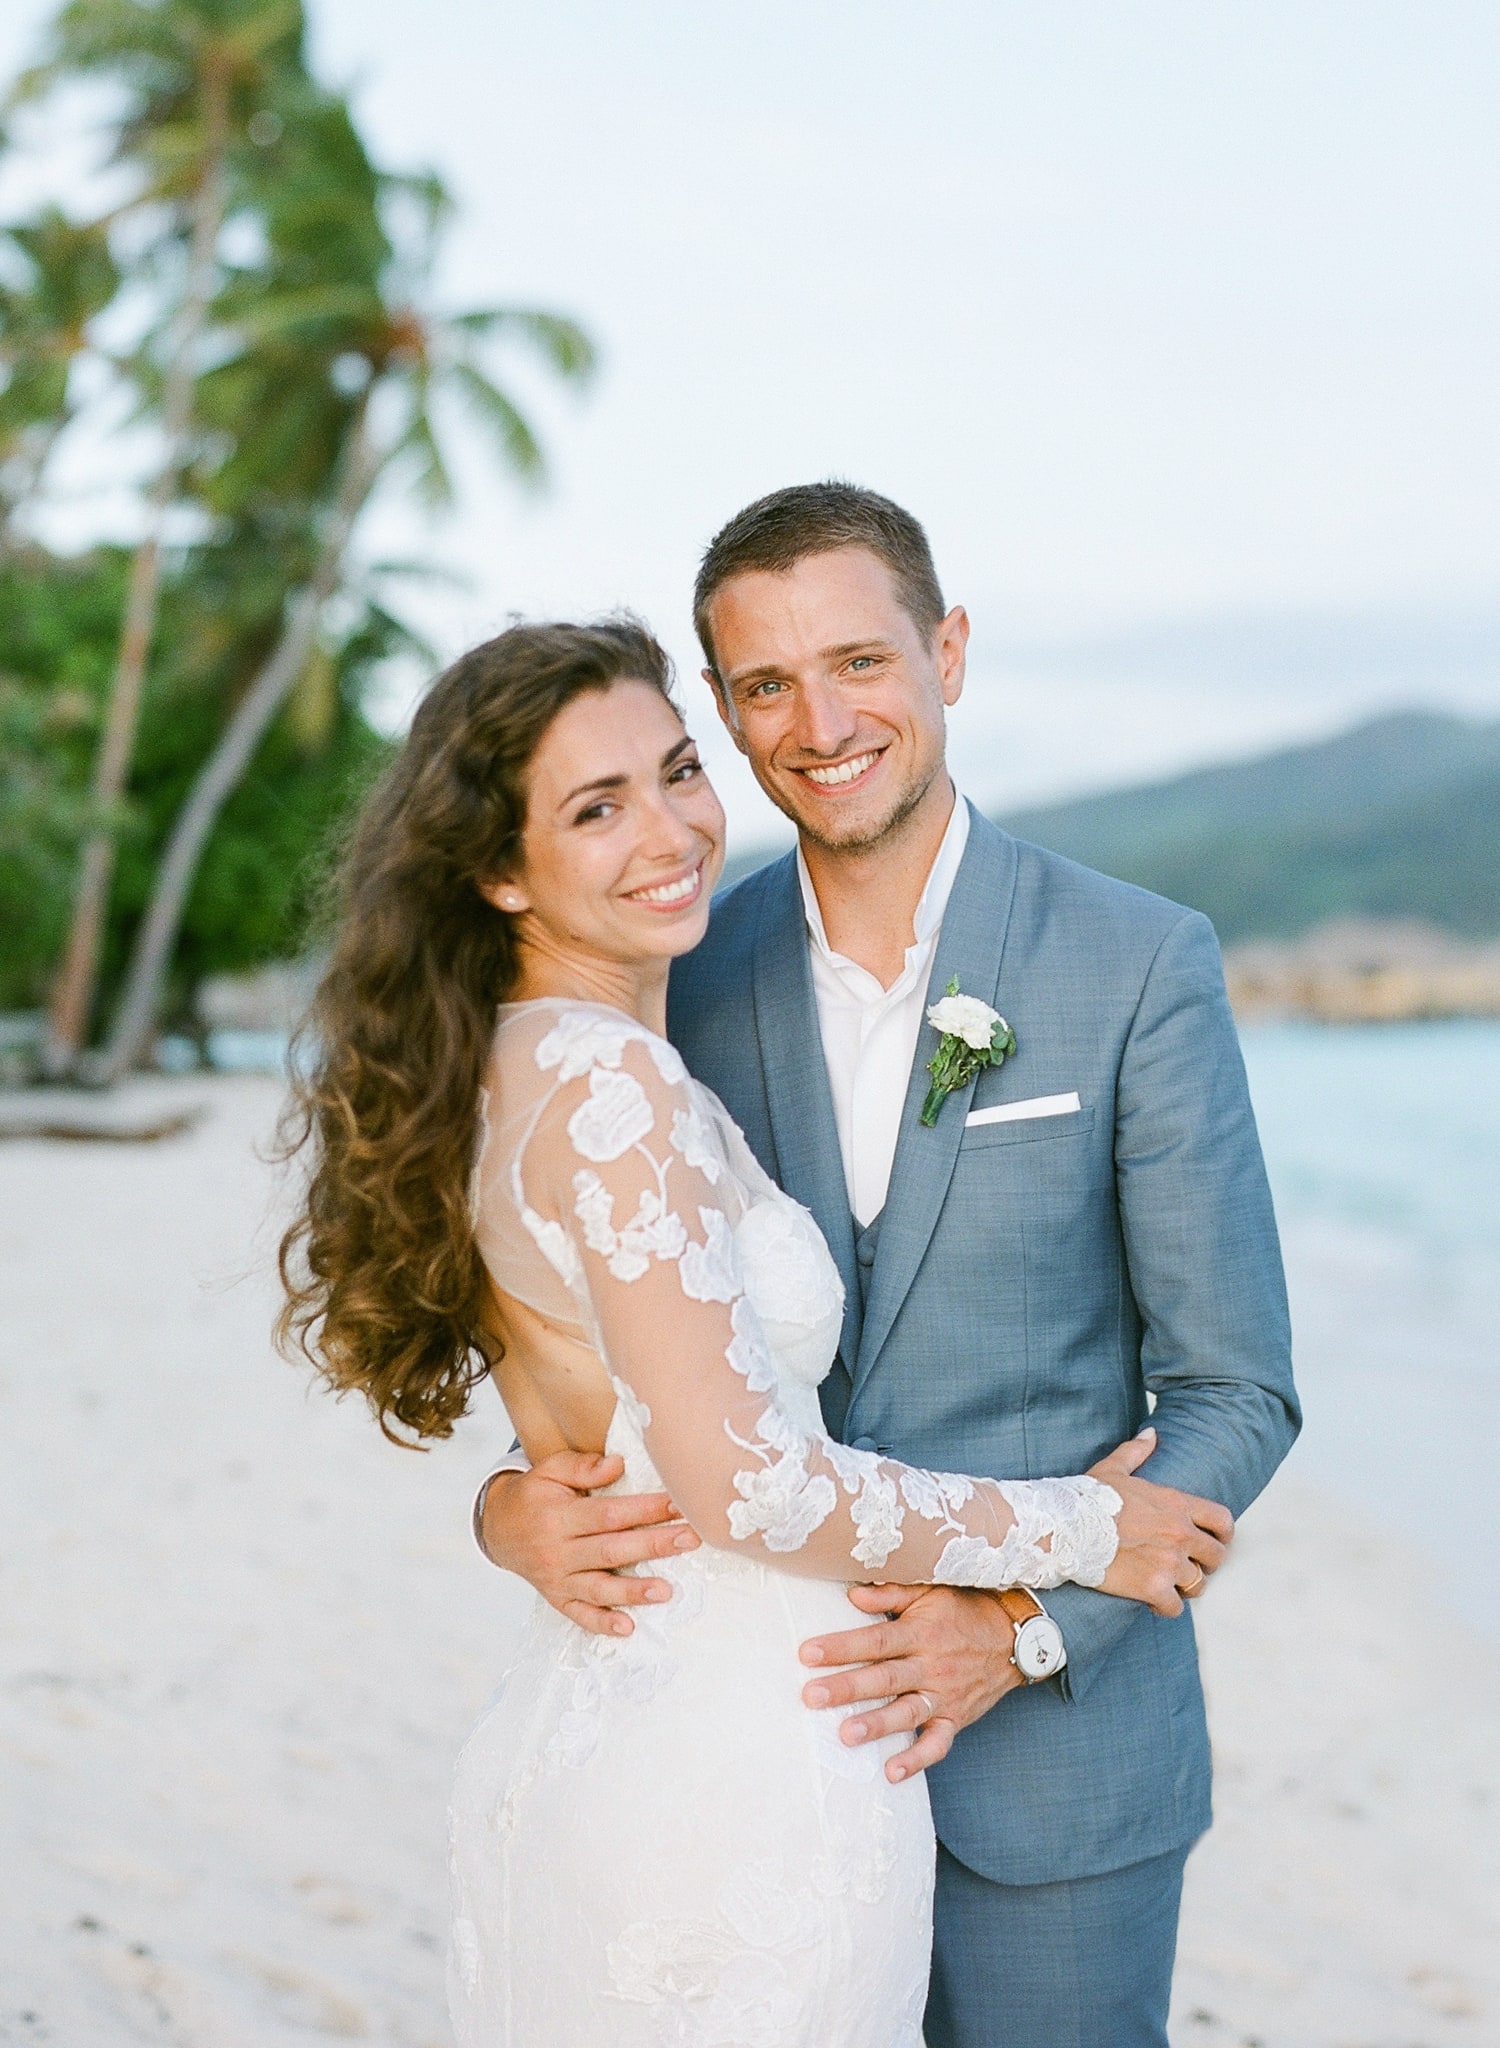 The bride and groom portrait at sunset in Bora Bora with soft light